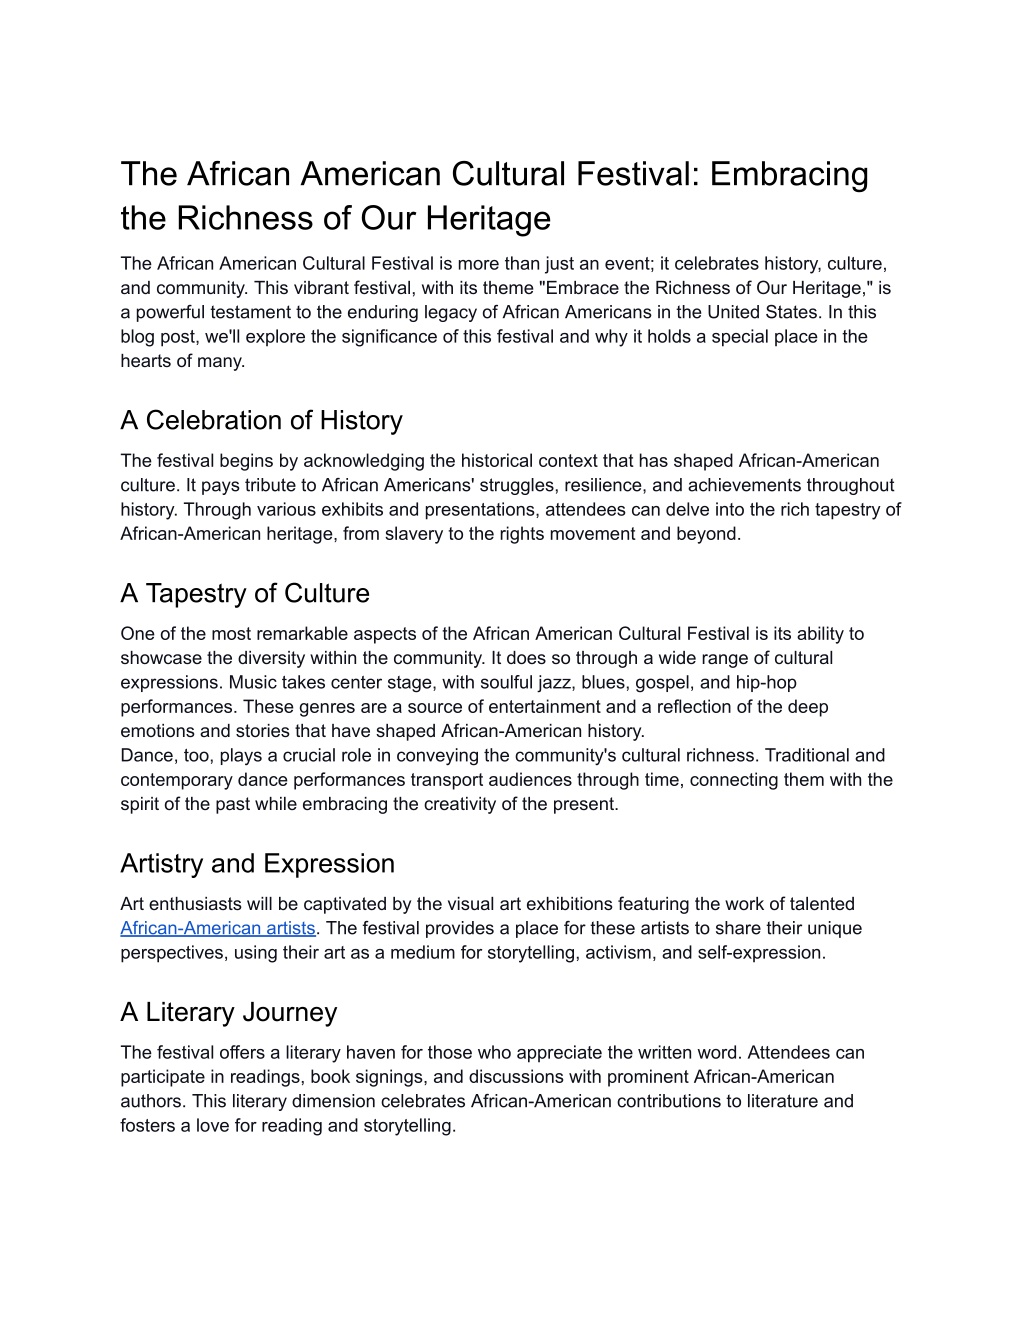 Ppt The African American Cultural Festival Embracing The Richness Of Our Heritage Powerpoint